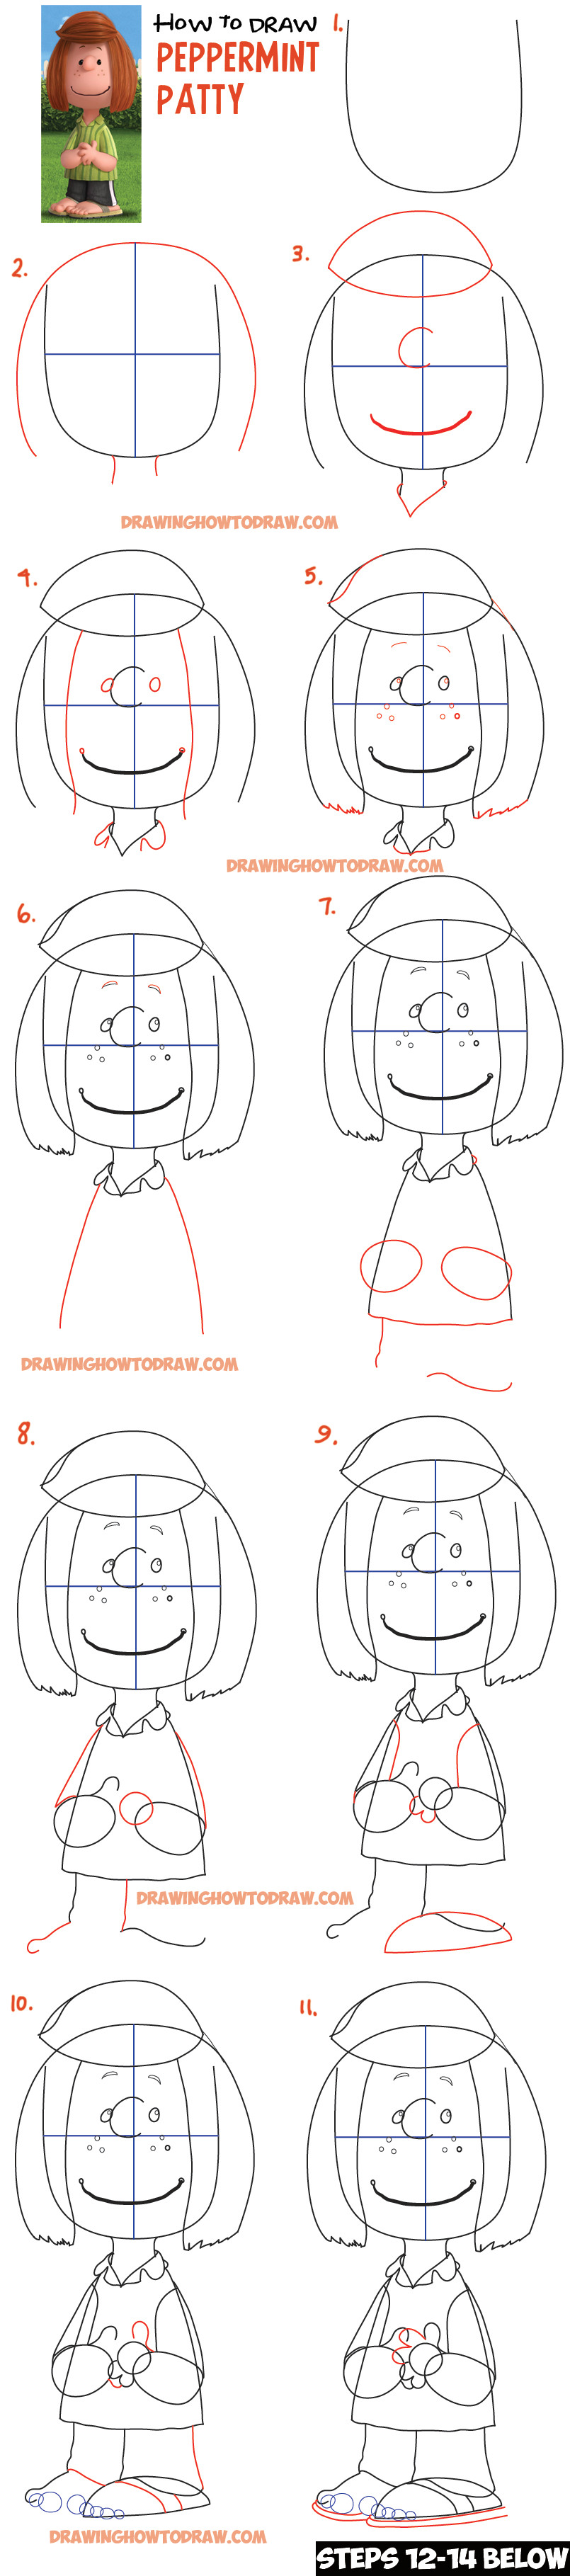 L Drawing Step by Step How to Draw Peppermint Patty From the Peanuts Movie Easy Tutorial